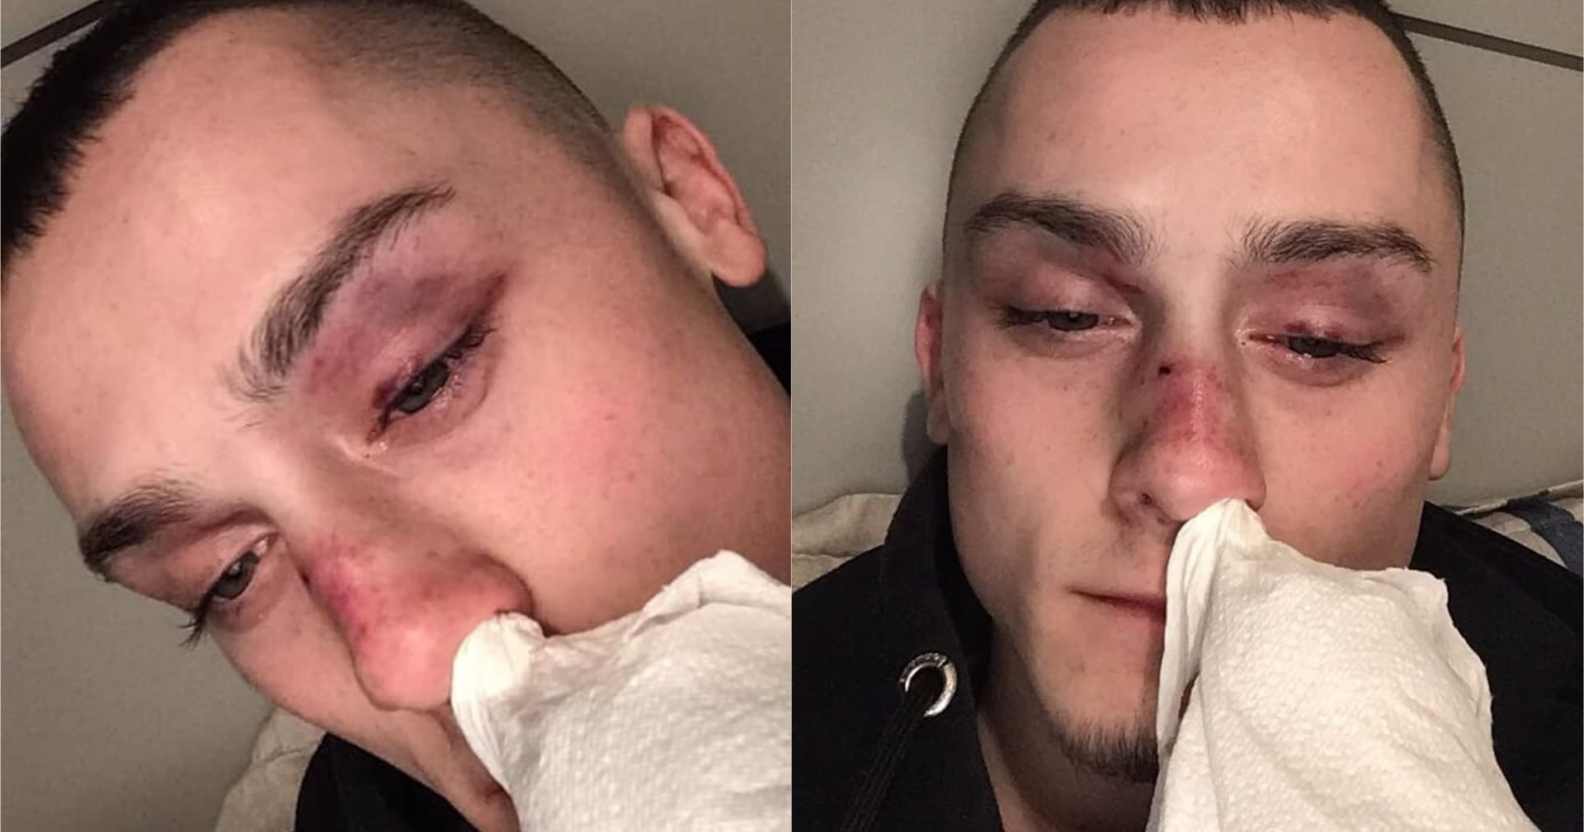 Ryan Winnard with bruises on his face after experiencing a homophobic assault